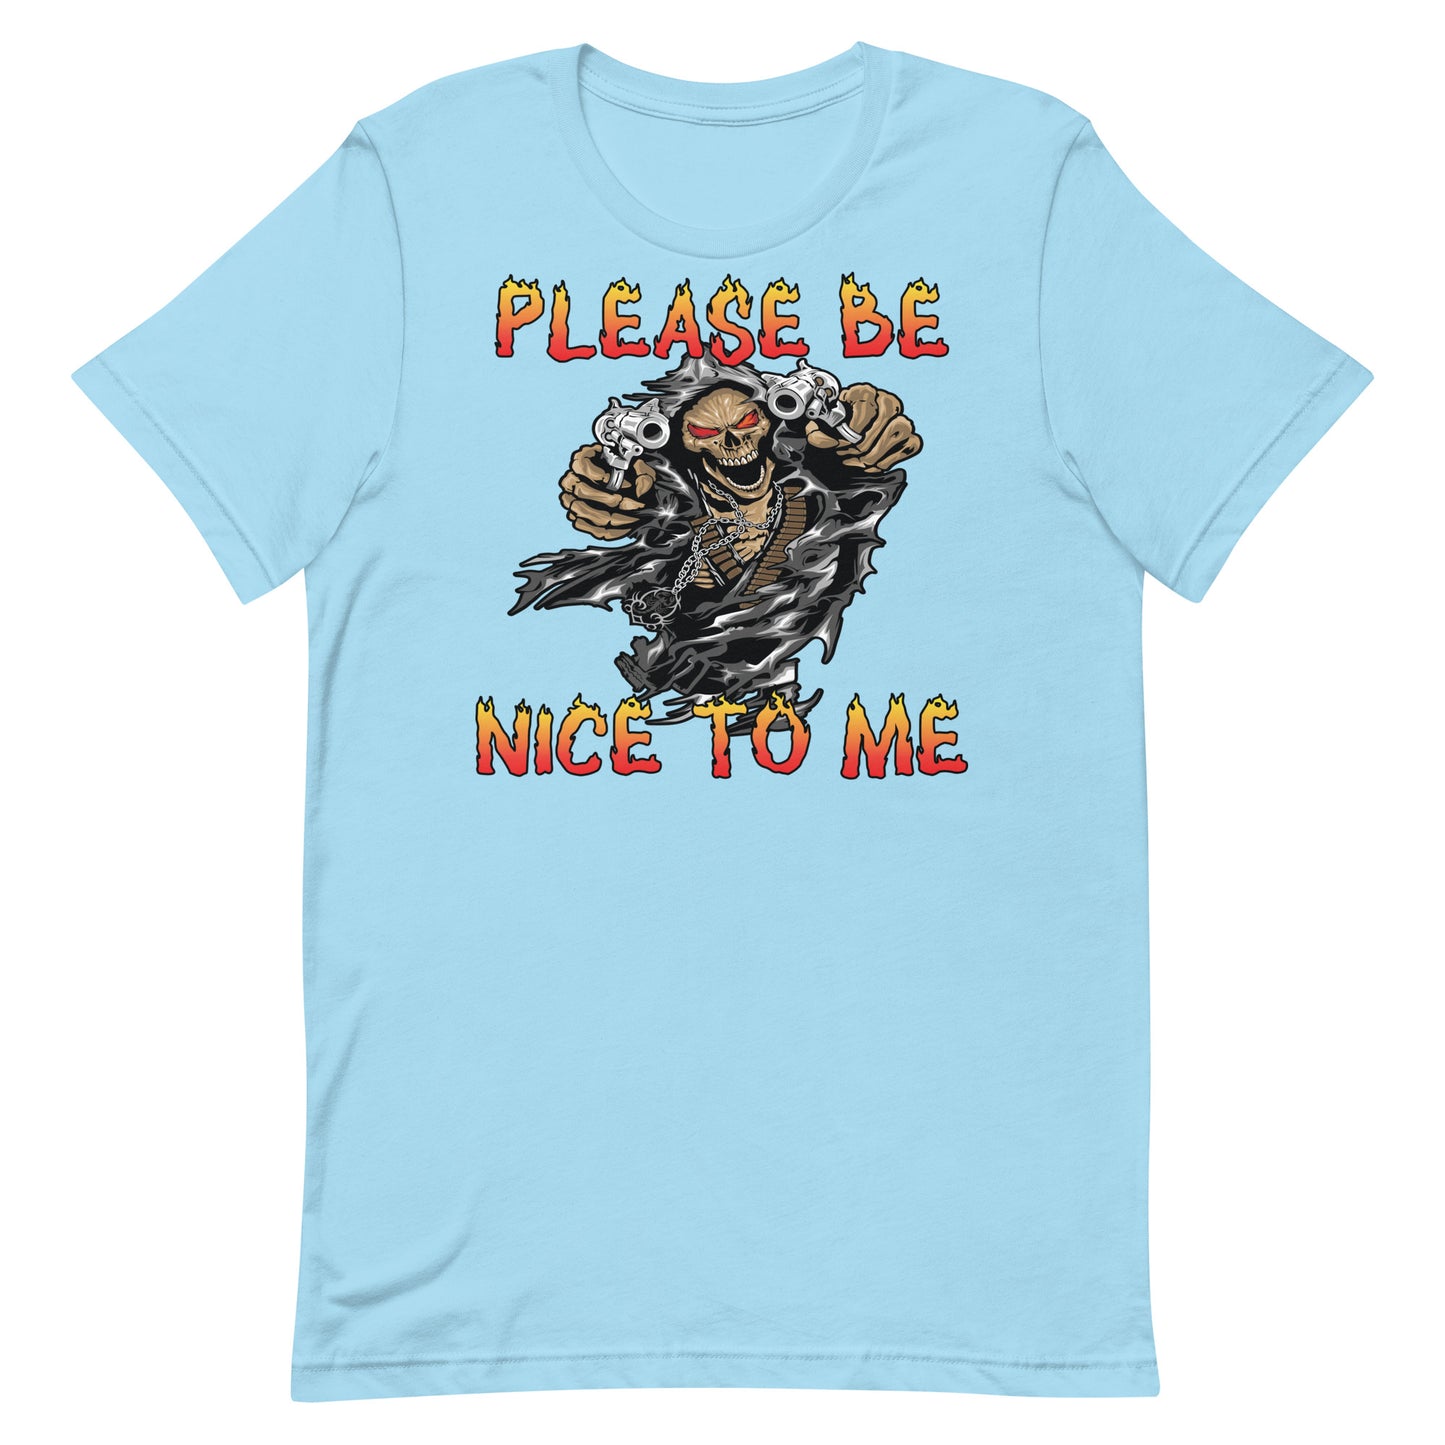 Please Be Nice to Me Unisex t-shirt